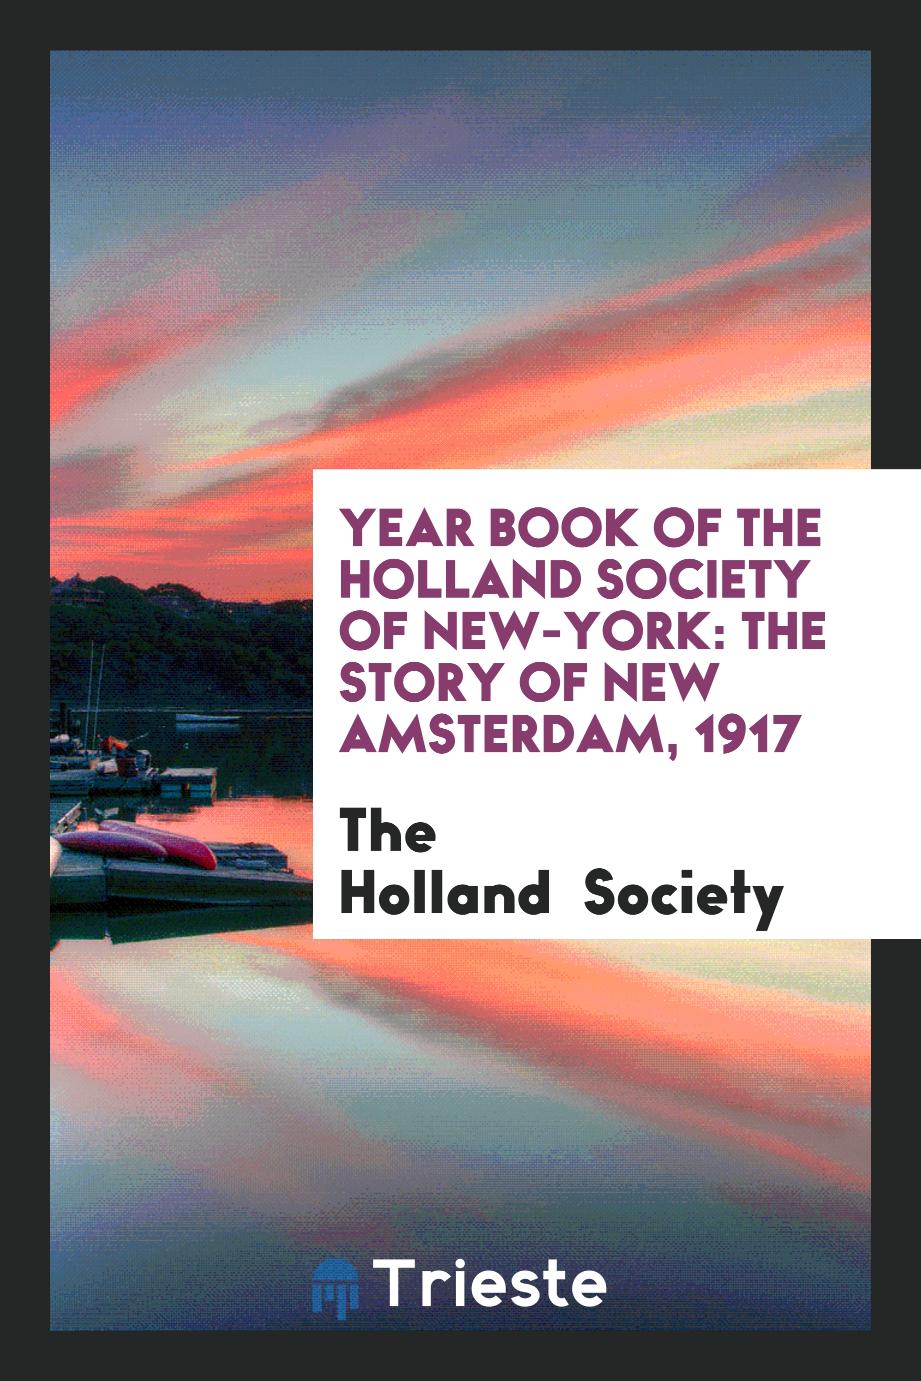 Year book of the Holland Society of New-York: the story of New Amsterdam, 1917